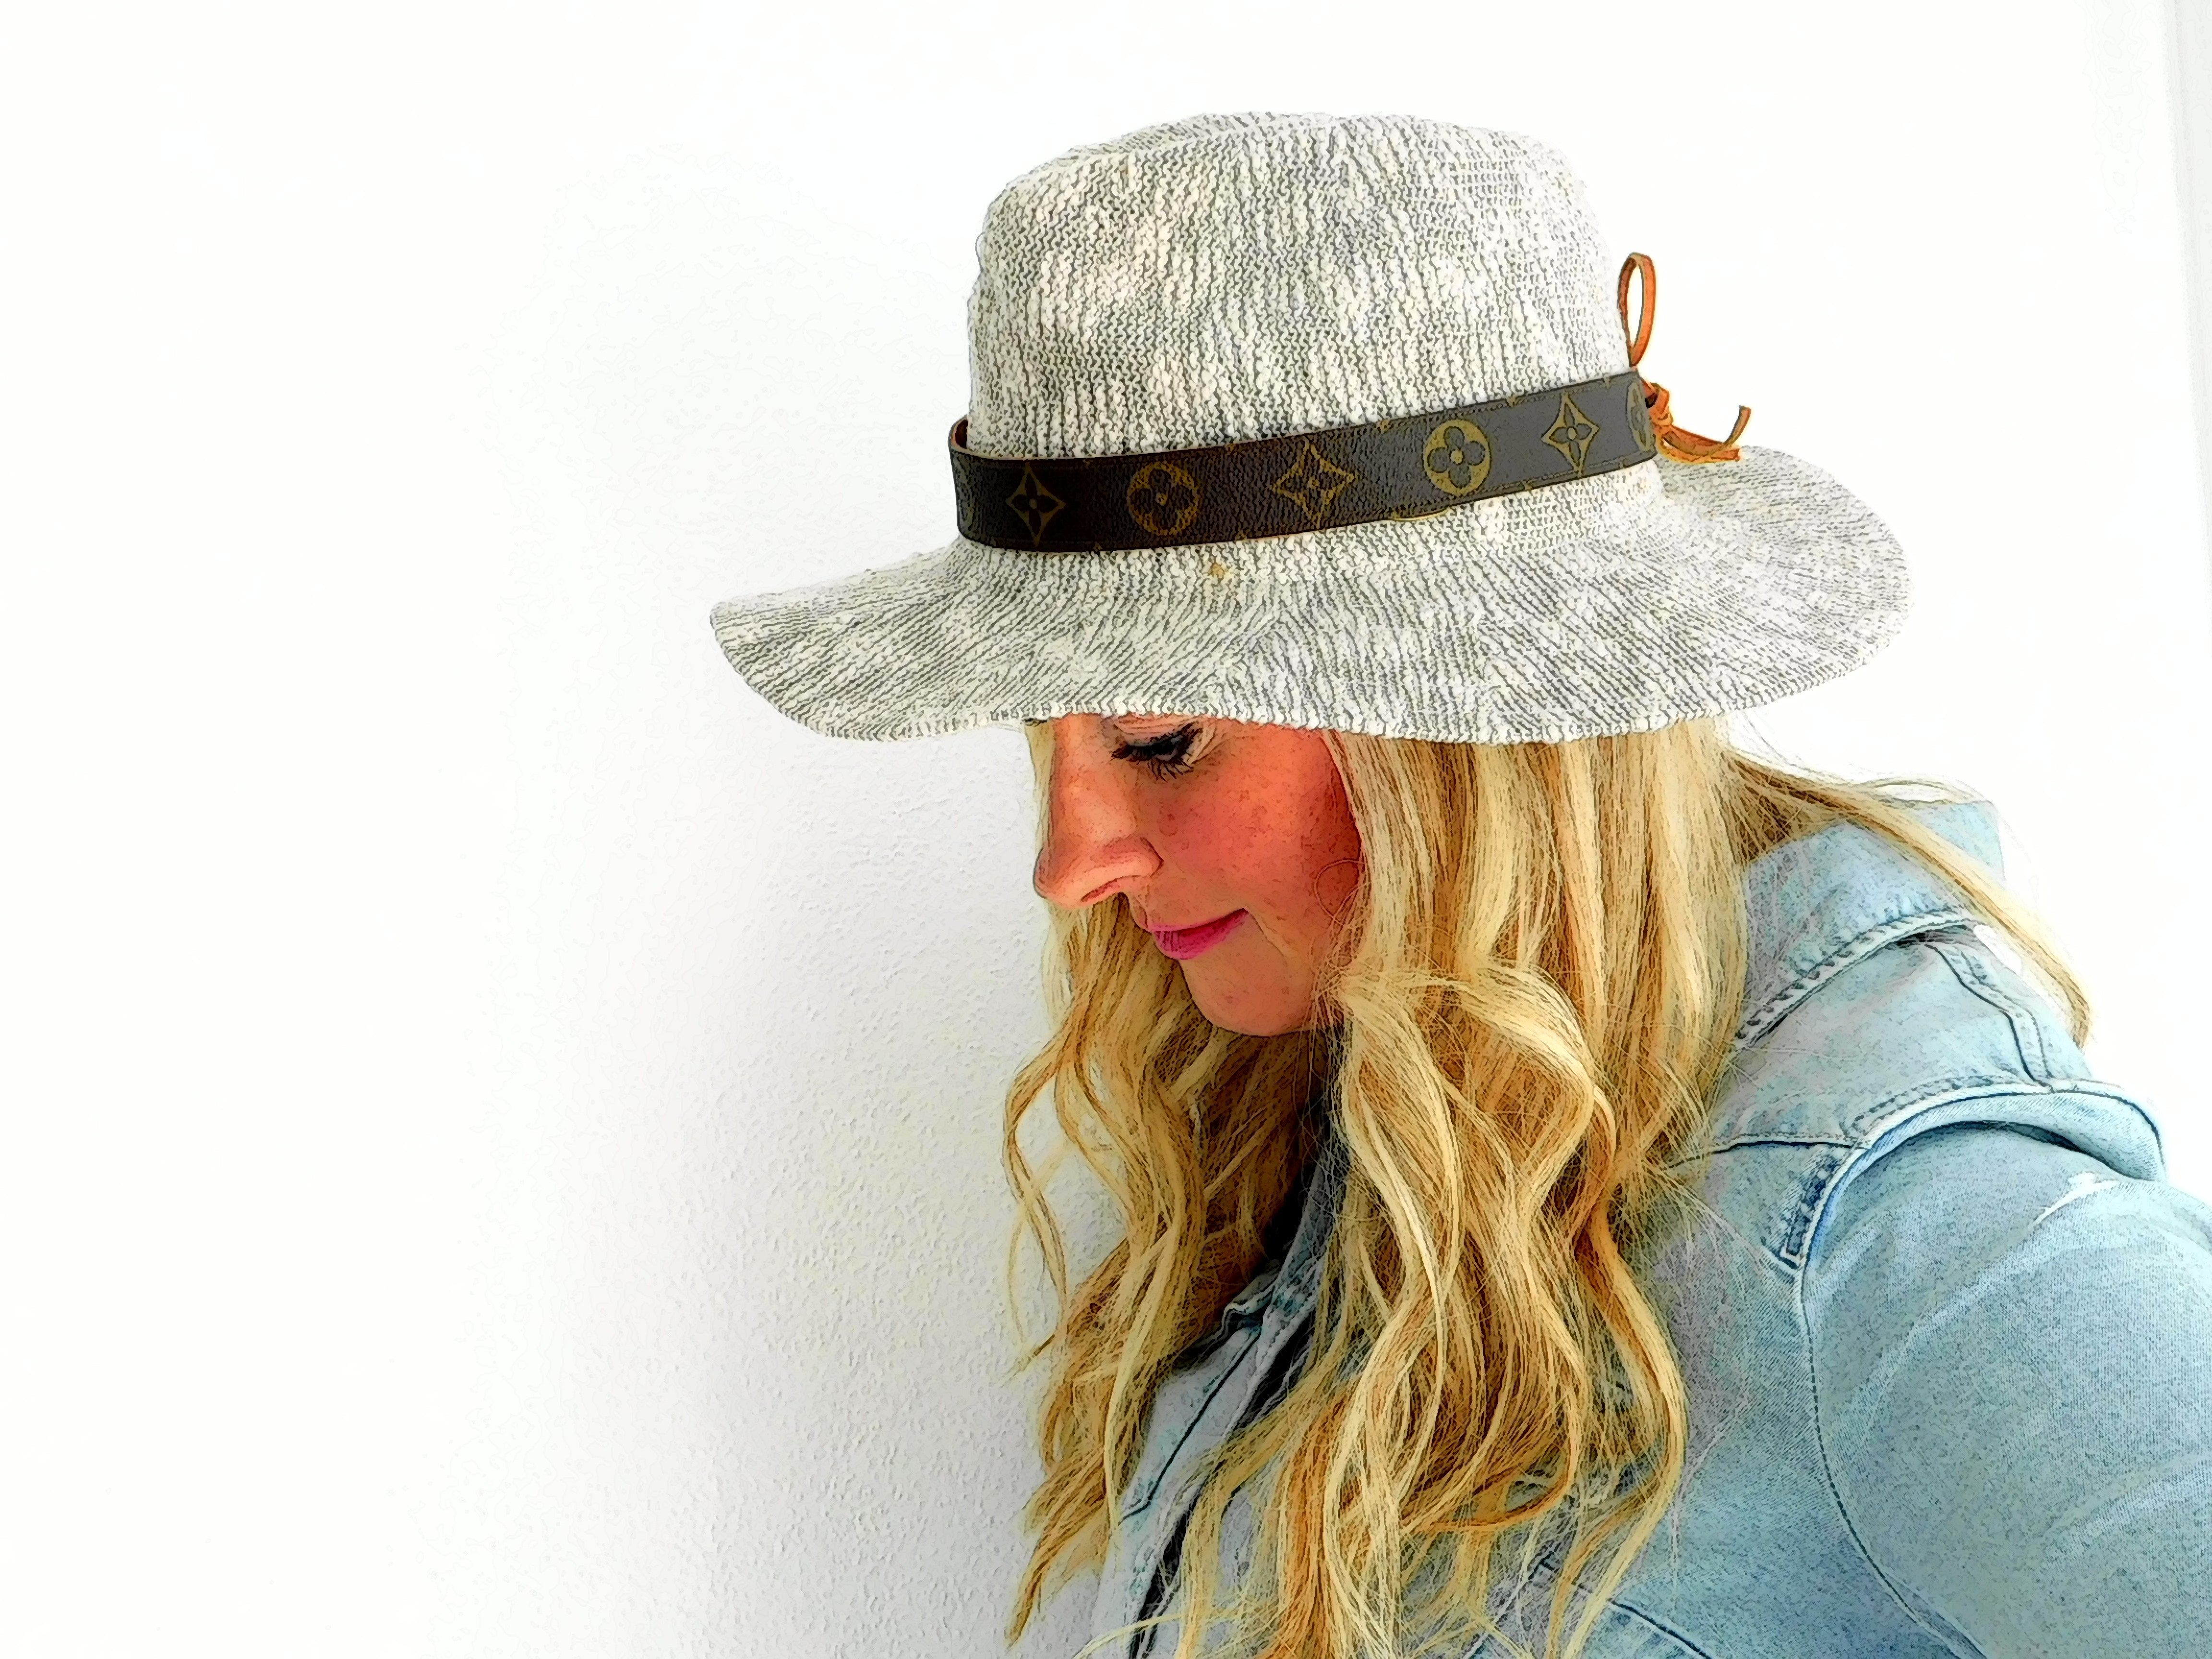 Upcycled Straw Louis Vuitton Hat – Southern Bliss